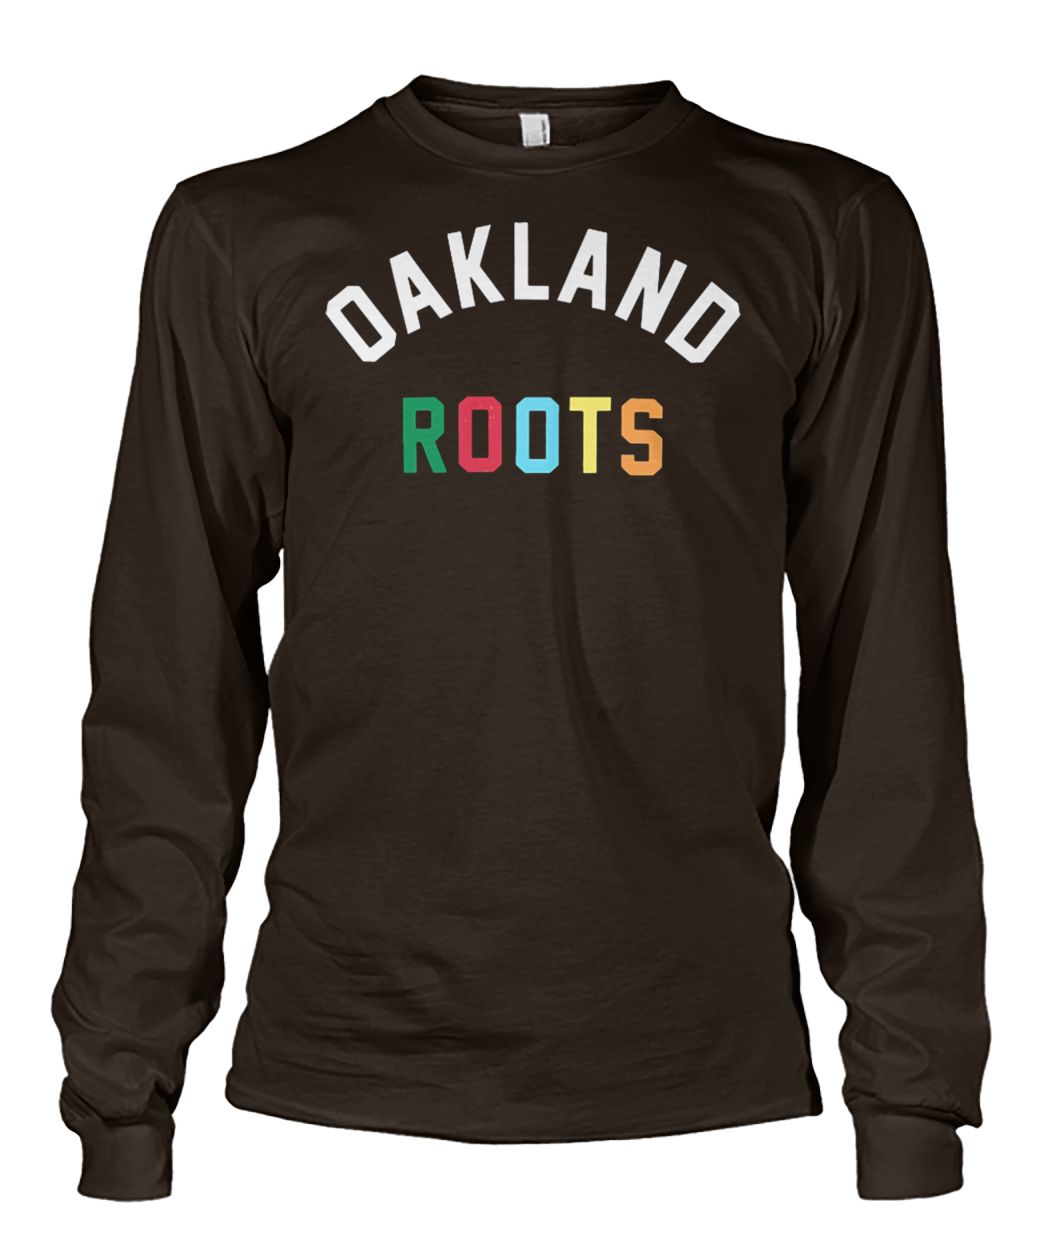 Dame oakland roots unisex long sleeve